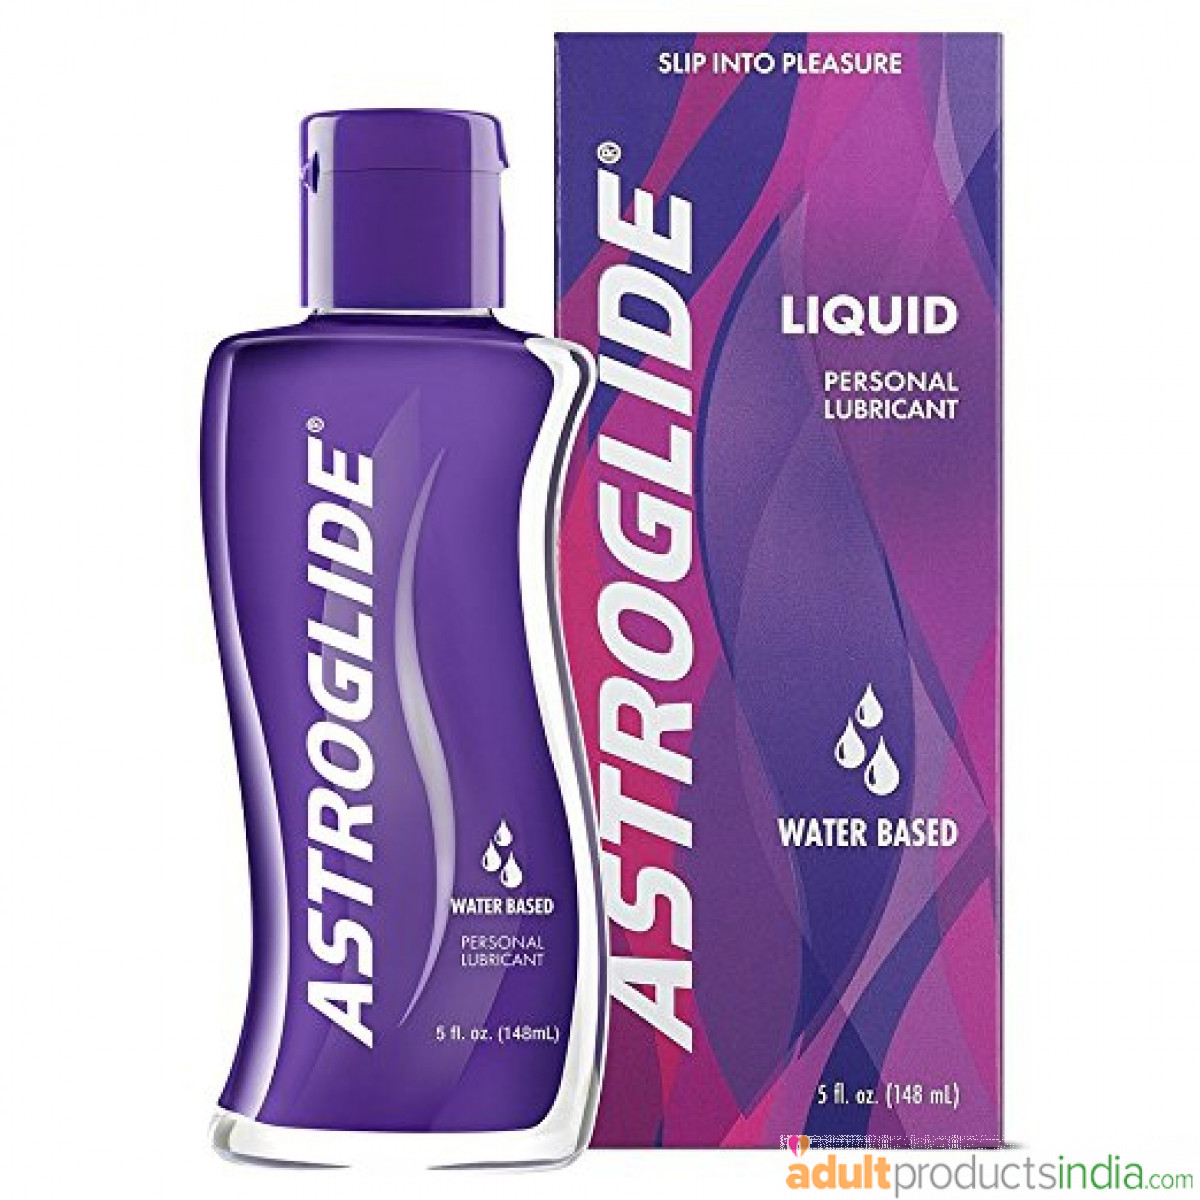 Astroglide Liquid - Water Based Personal Lubricant that Lubricates & Moisturizes